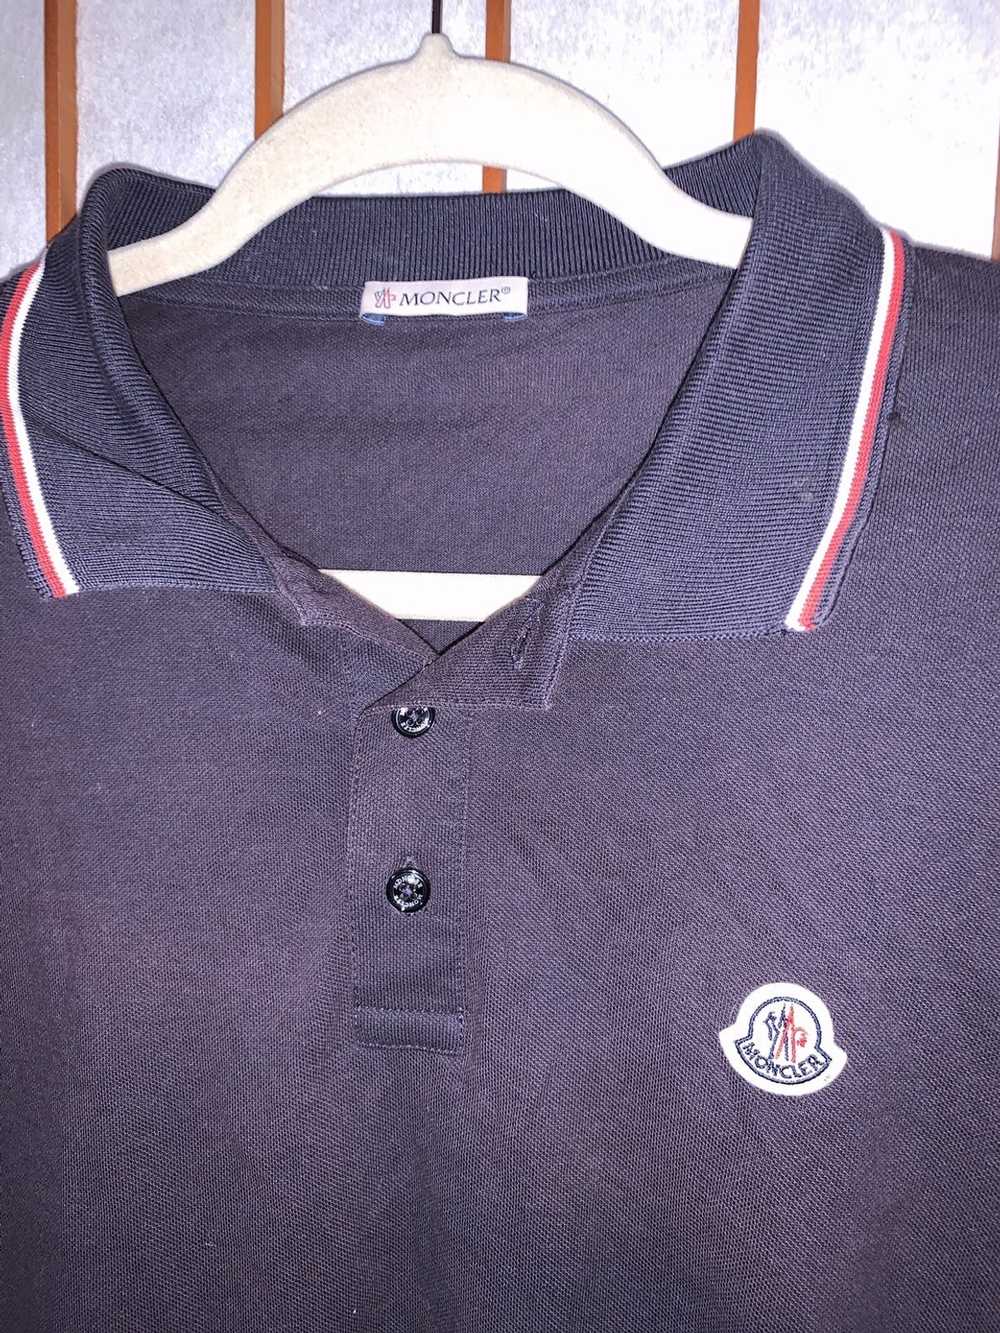 Moncler MONCLER MAGLIA POLO MANICA Distressed ble… - image 3